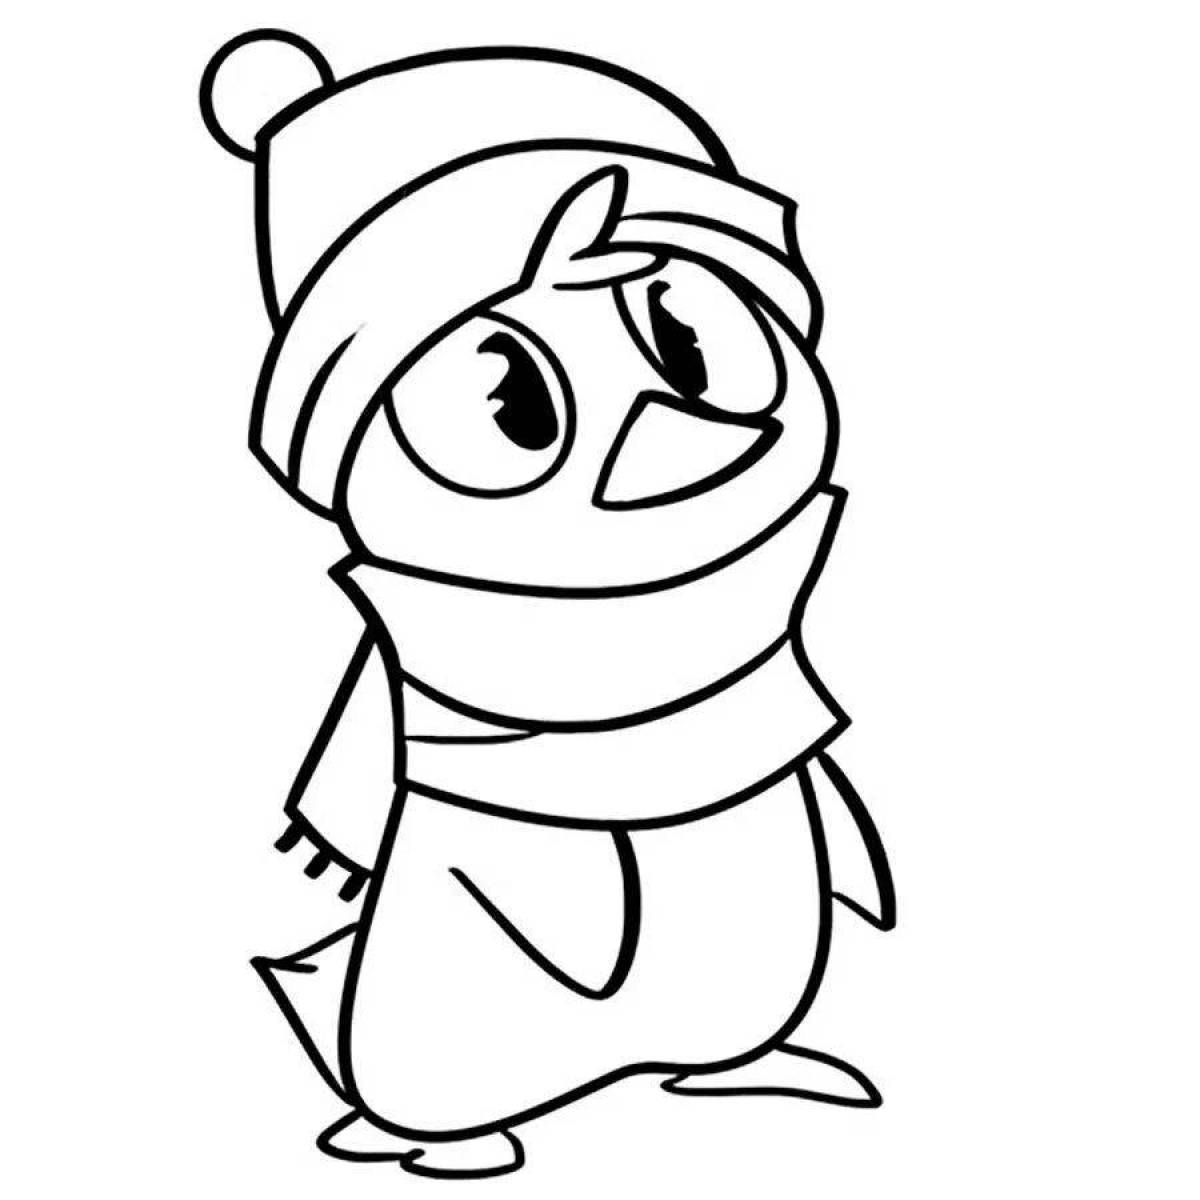 Adorable penguin coloring page